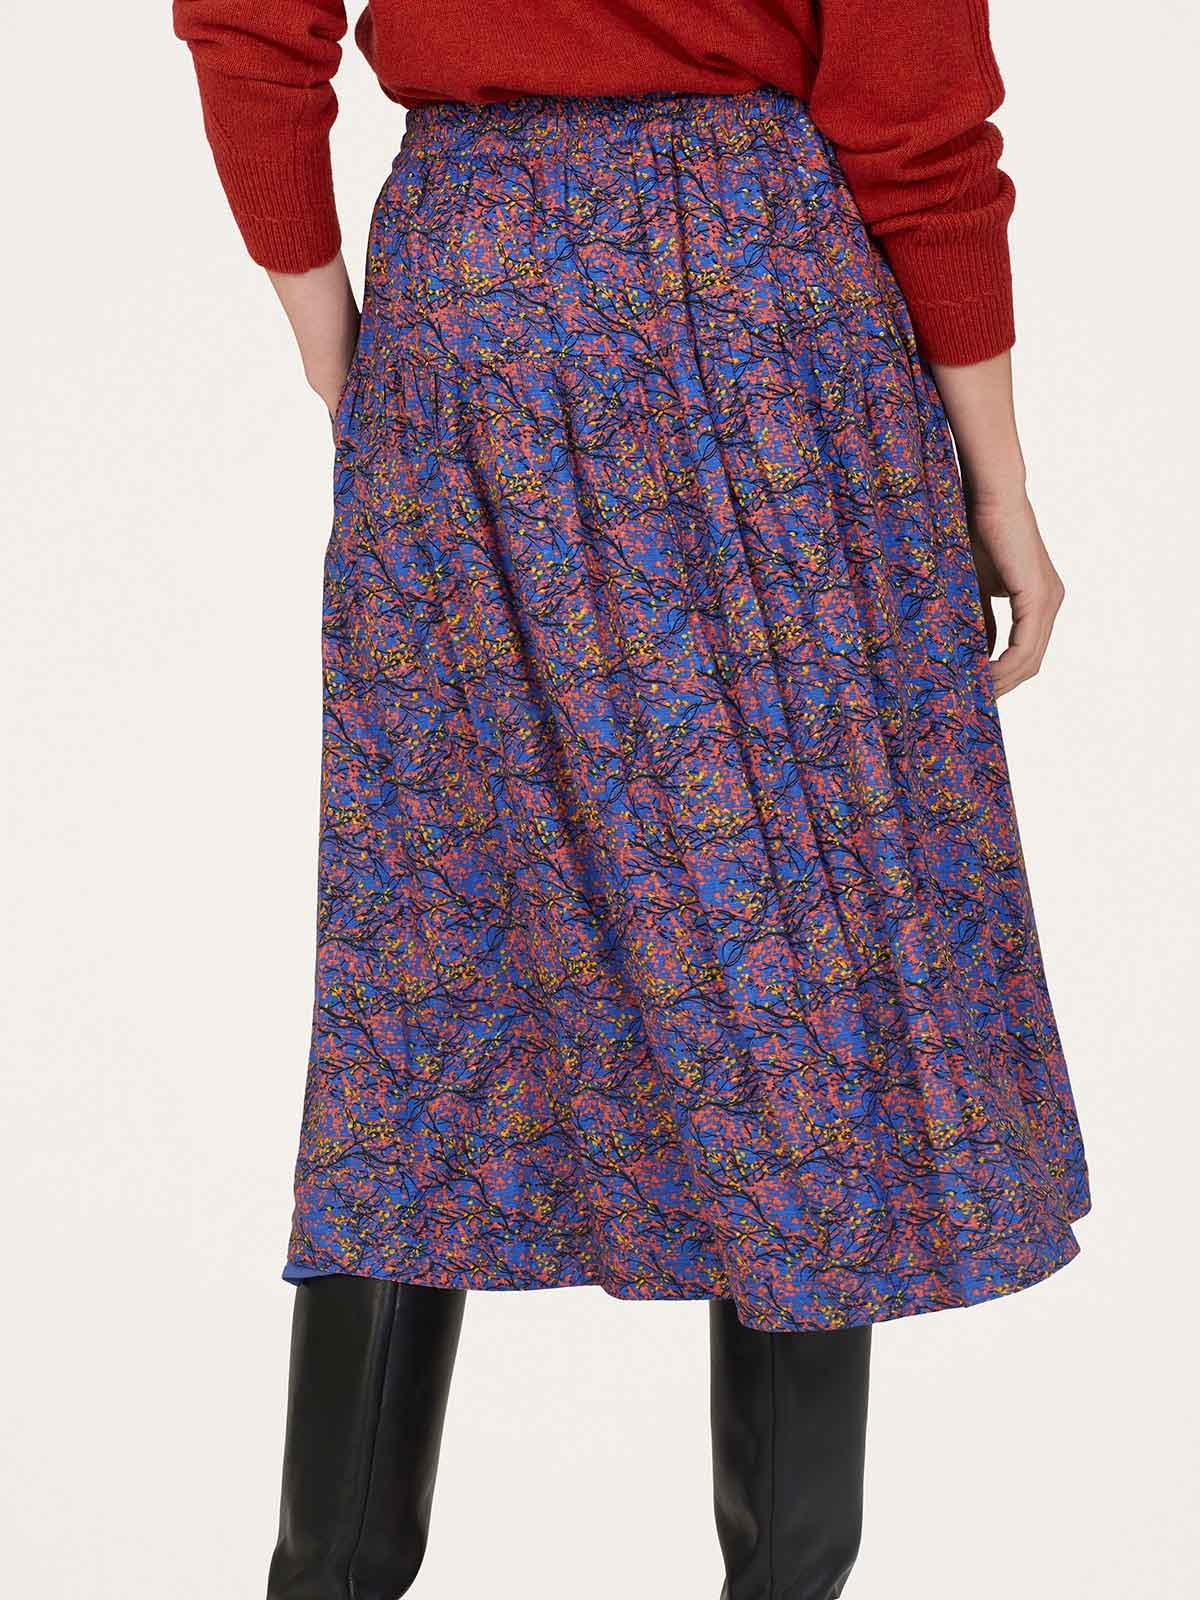 Fawn Lenzing™ Ecovero™ Printed Skirt - Periwinkle Blue